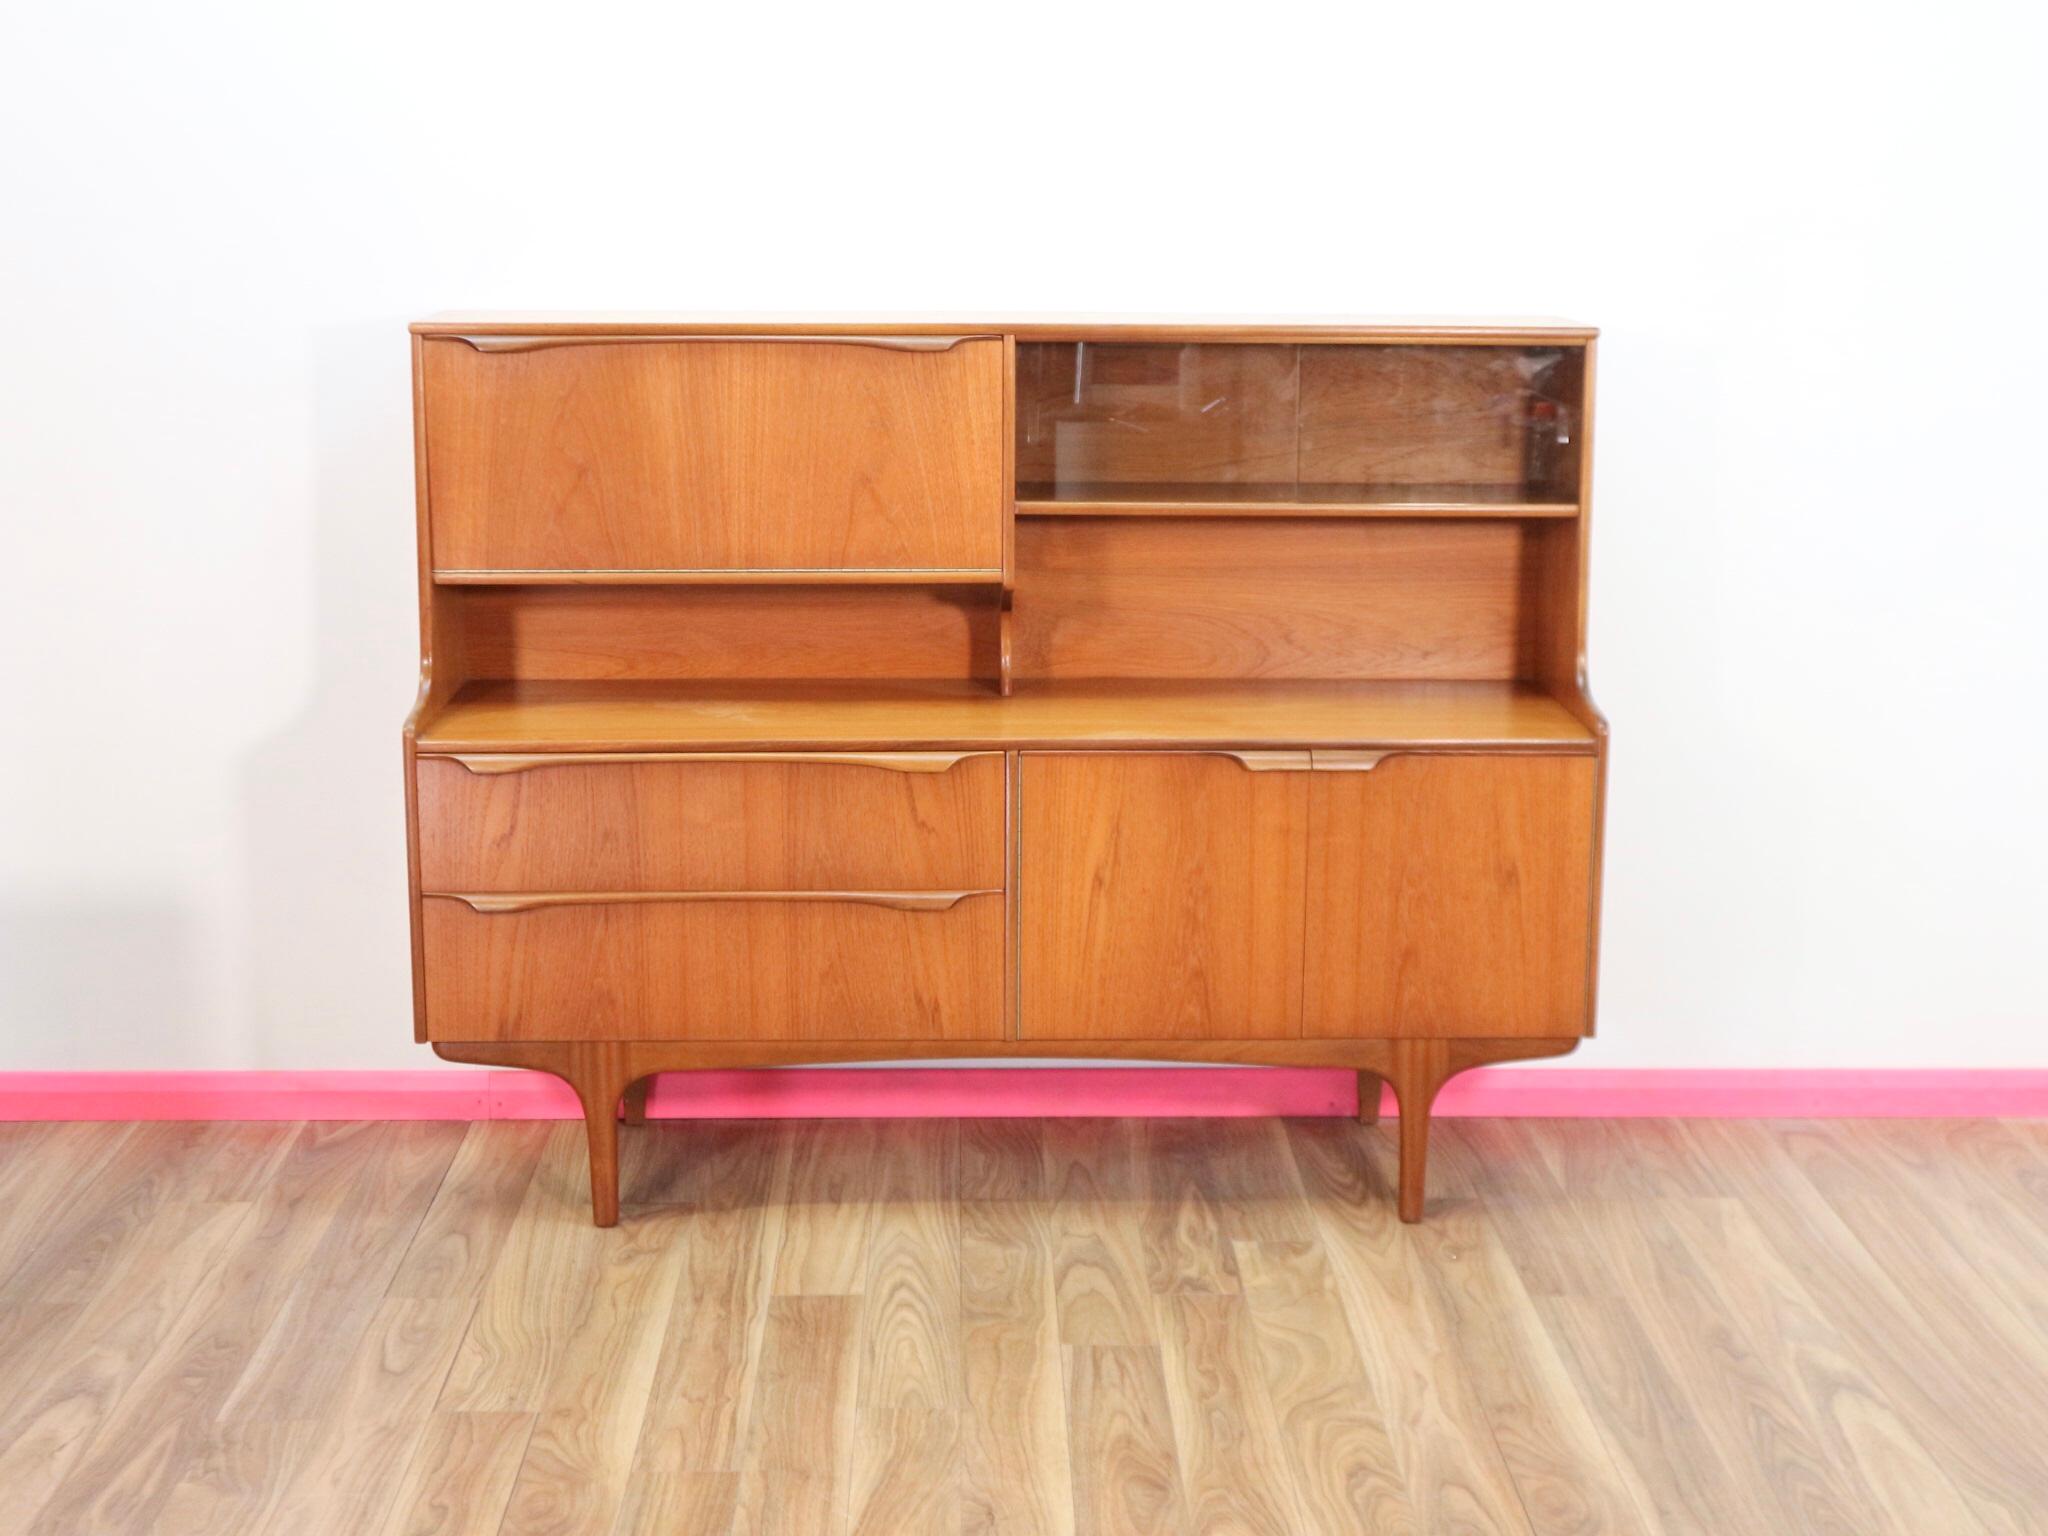 A stunning credenza from Sutcliffe of Todmorden’s S Form range. Sutcliffe were known for their high quality workmanship and this piece is a fine example of that. This is an imposing piece that would set off and Mid Century styled interior